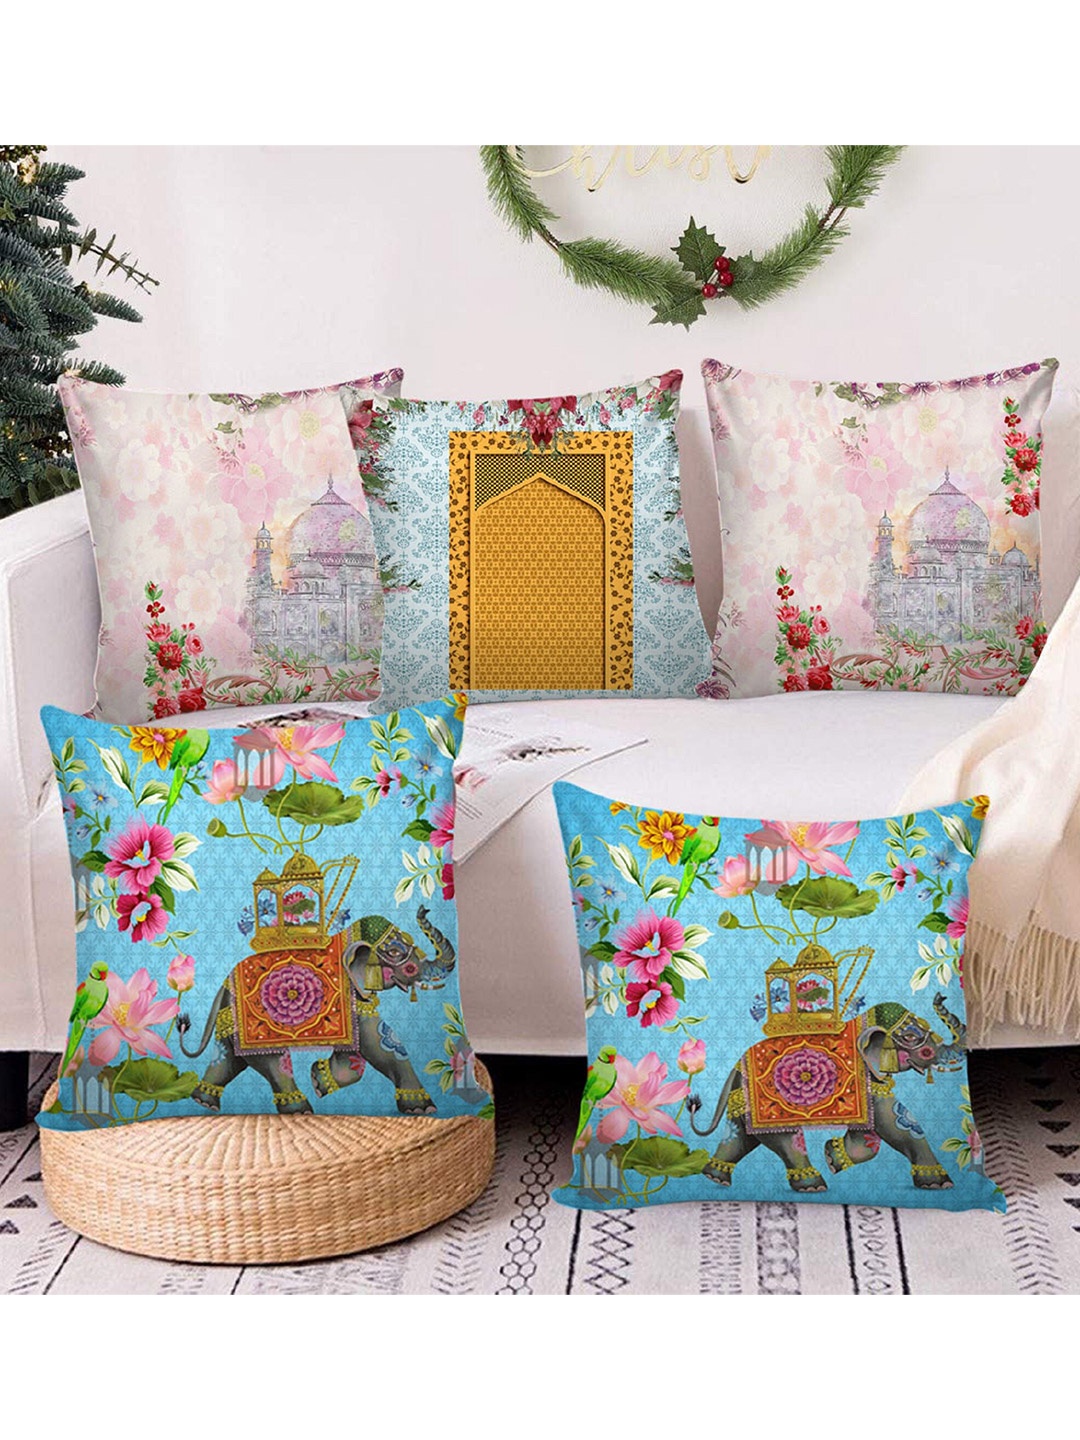 

AEROHAVEN Blue & Pink Set of 5 Ethnic Motifs Square Cushion Covers